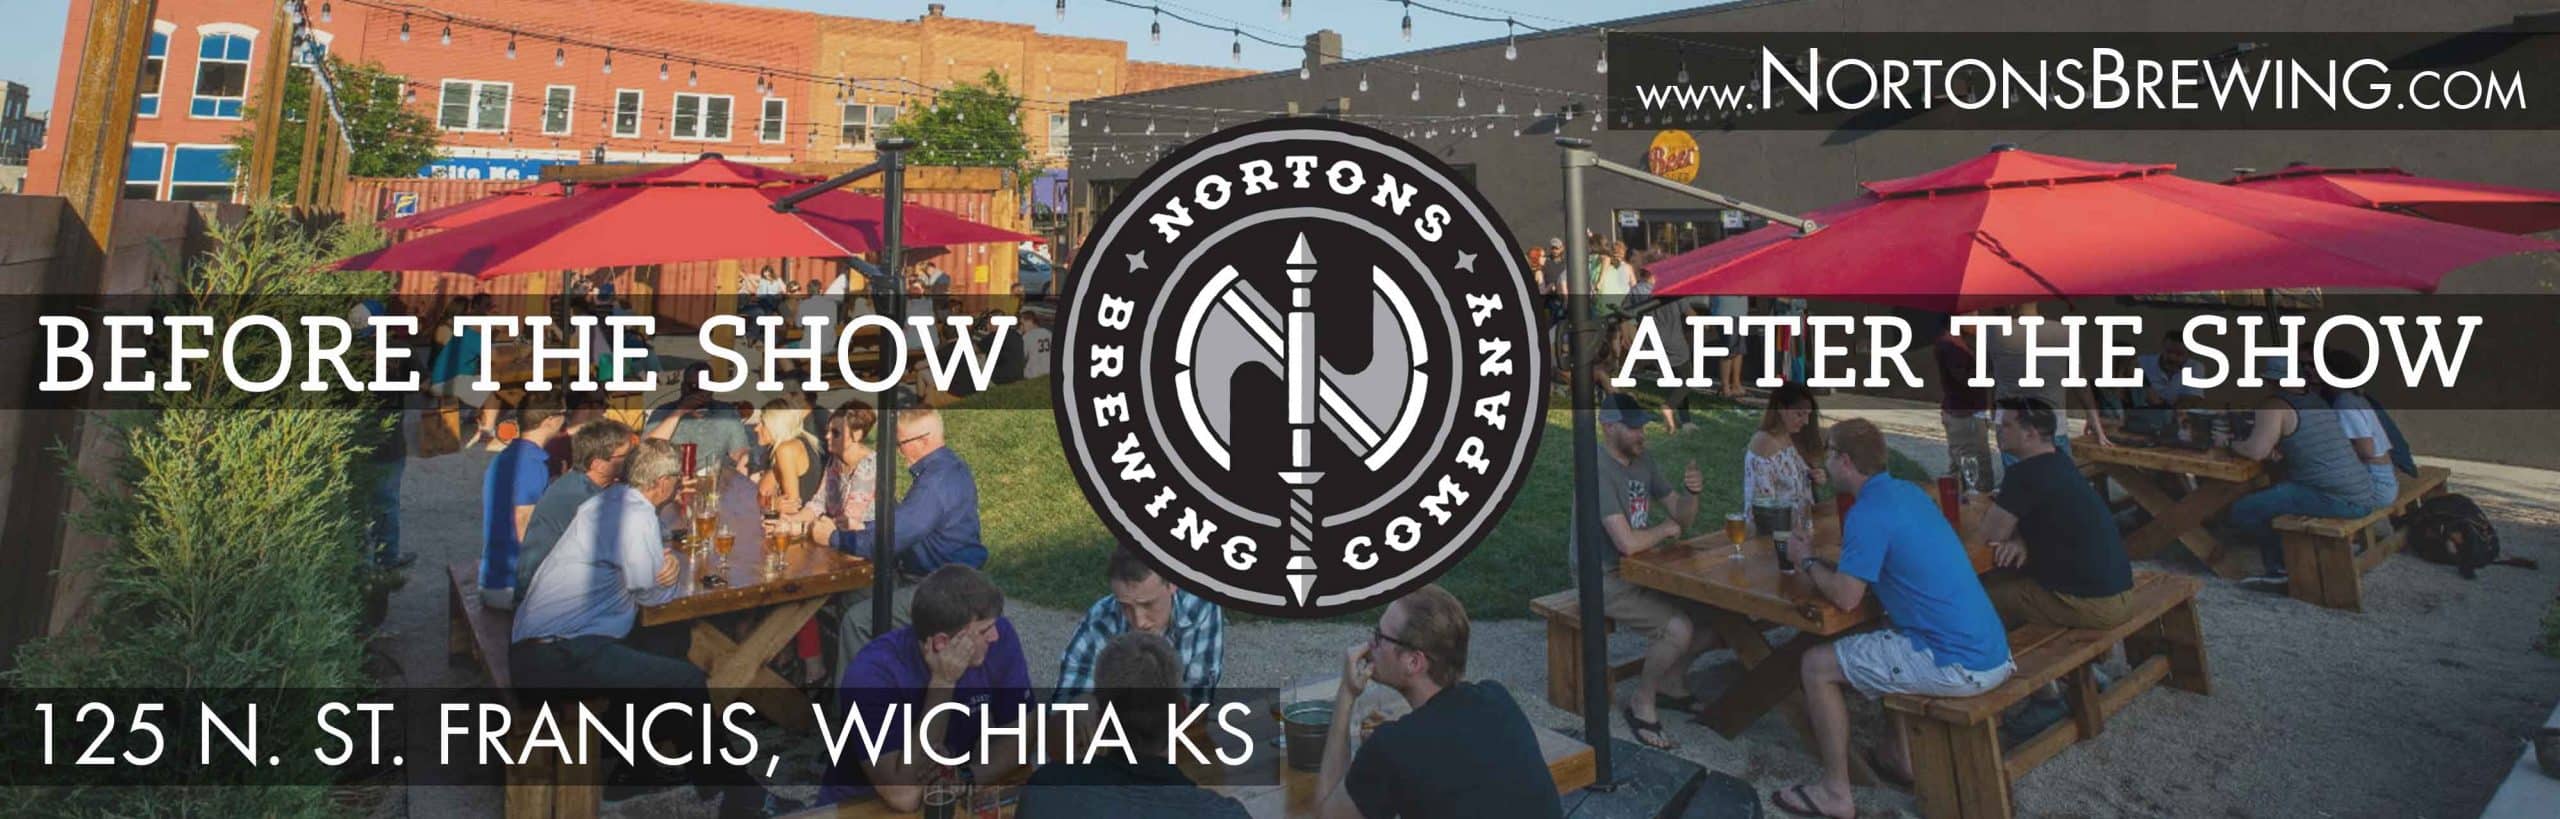 https://wichitaevents.com/wp-content/uploads/2021/05/Wichita-Events-Nortons-Brewing-Company-Homepage-Banner-LO-RES-scaled.jpg